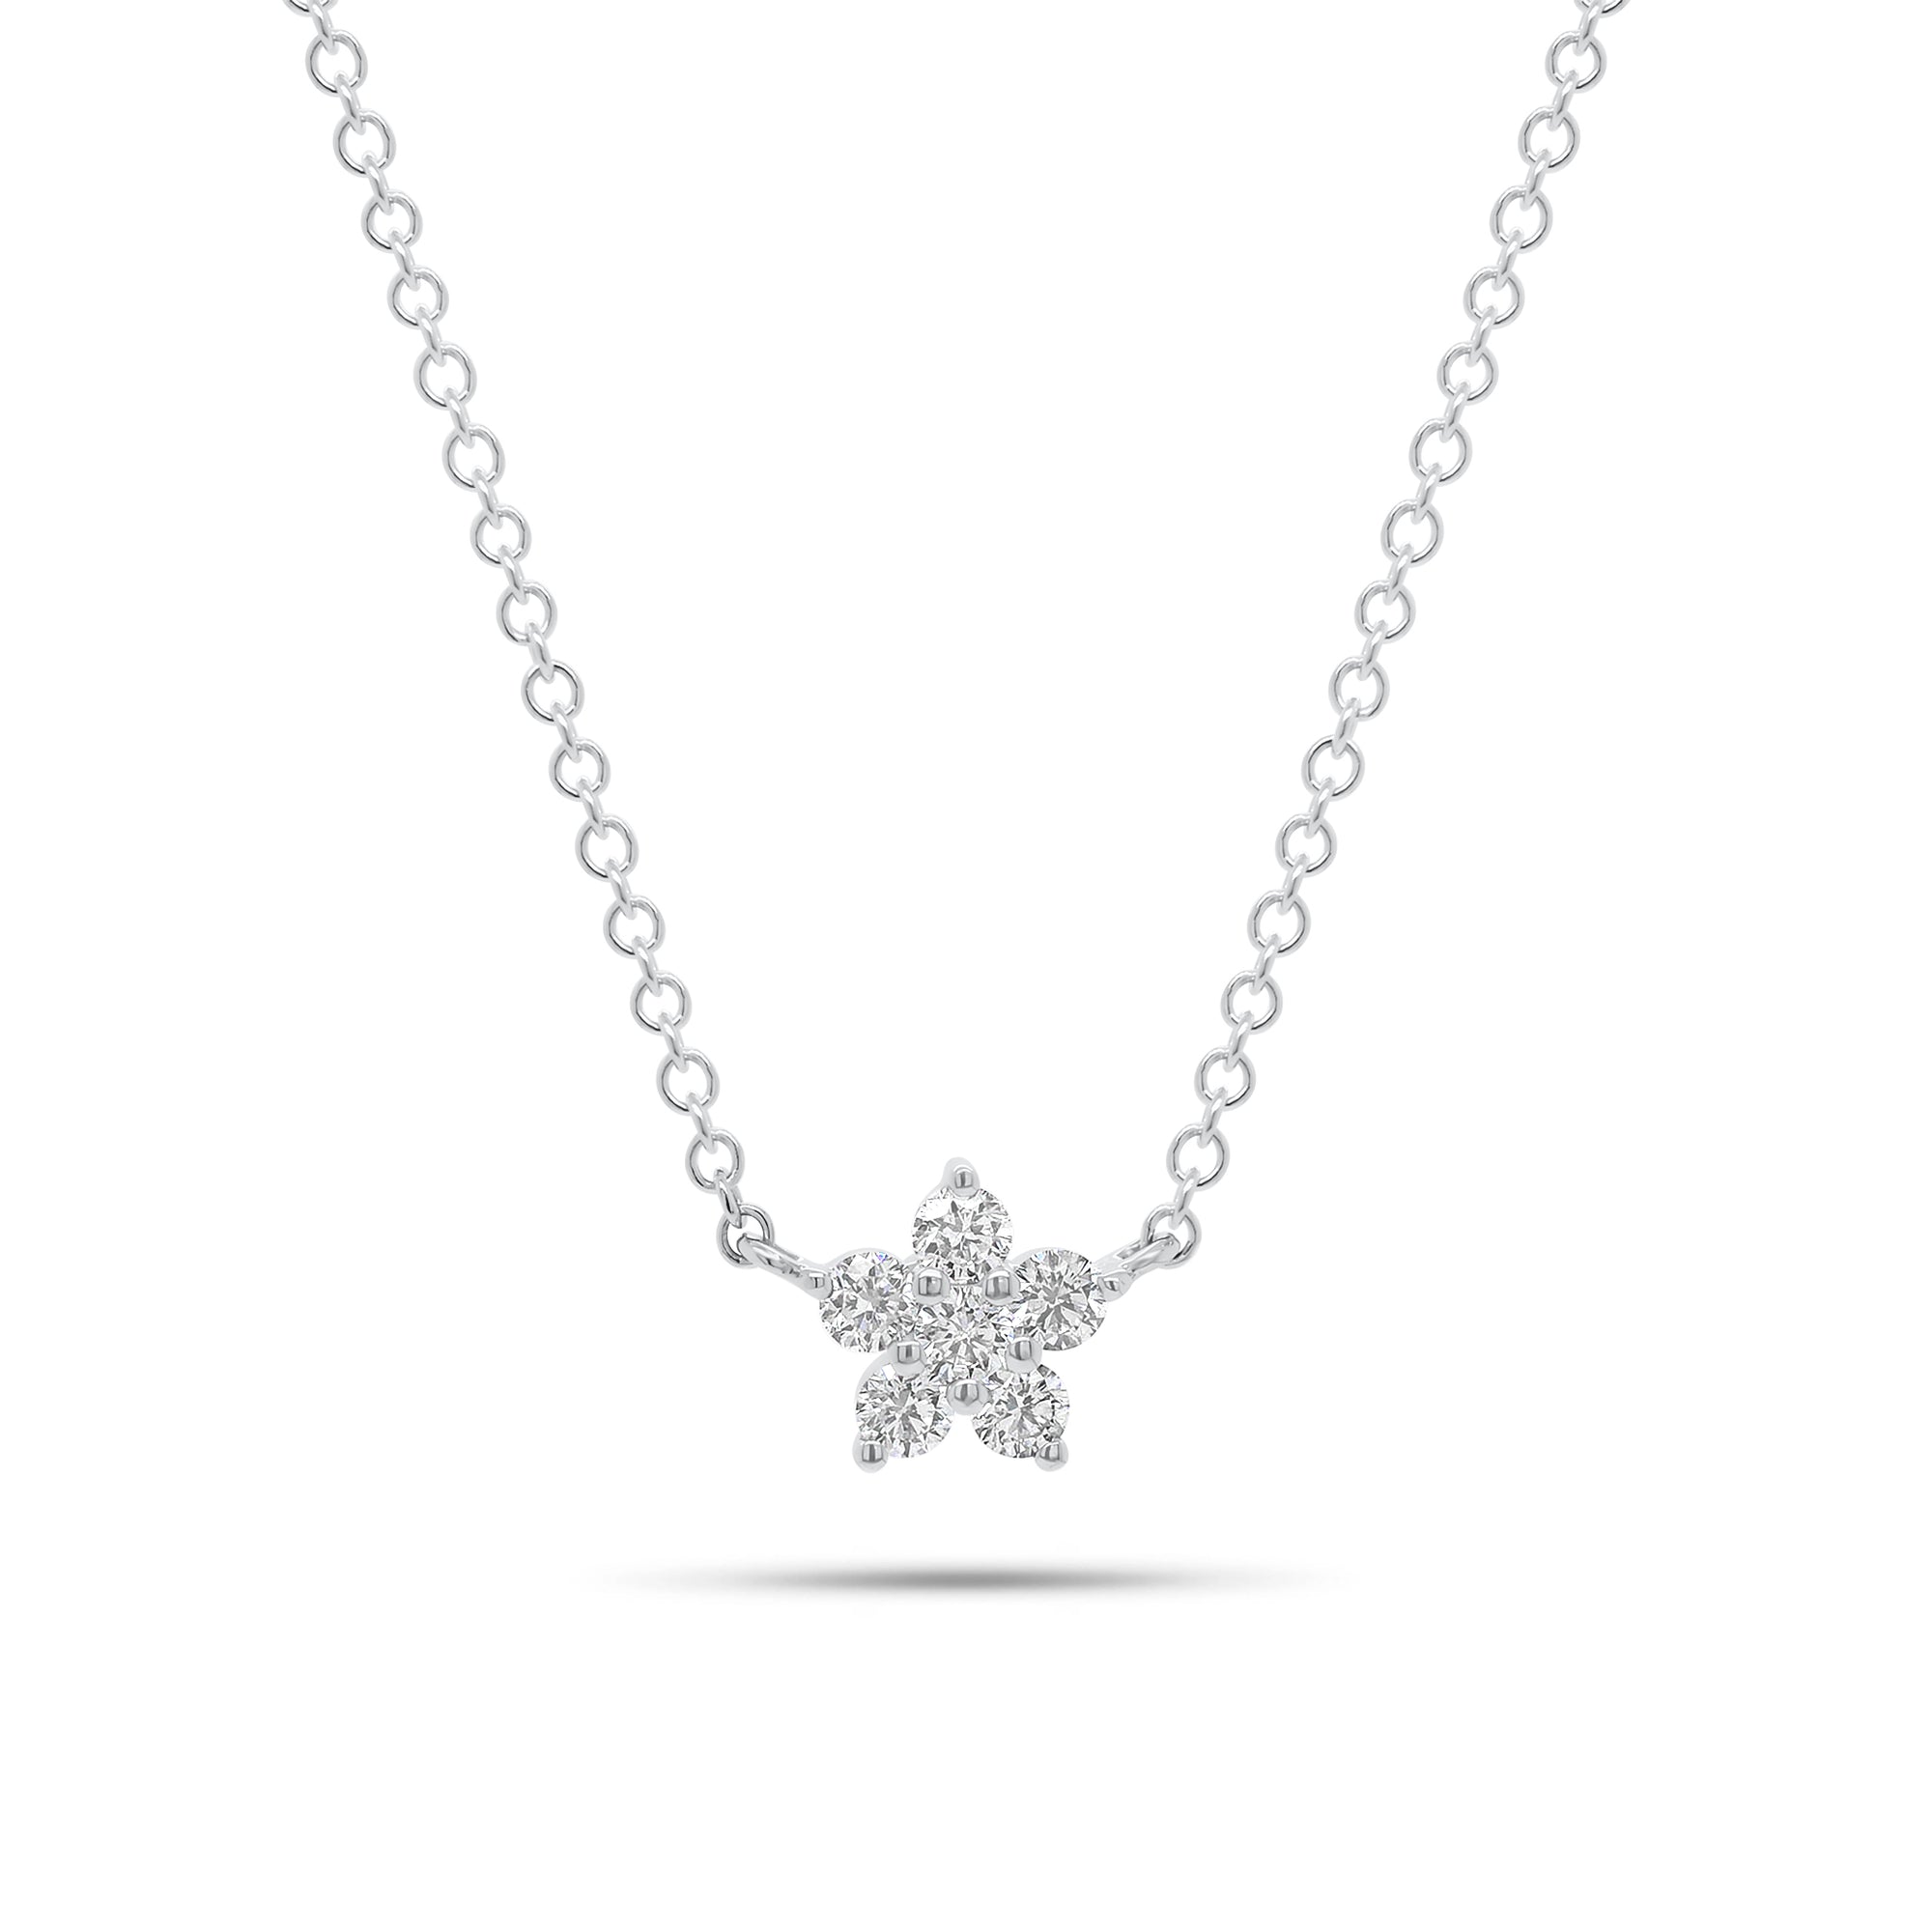 Diamond Simple Flower Pendant Necklace - 14K gold weighing 1.77 grams  - 6 round diamonds weighing 0.18 carats